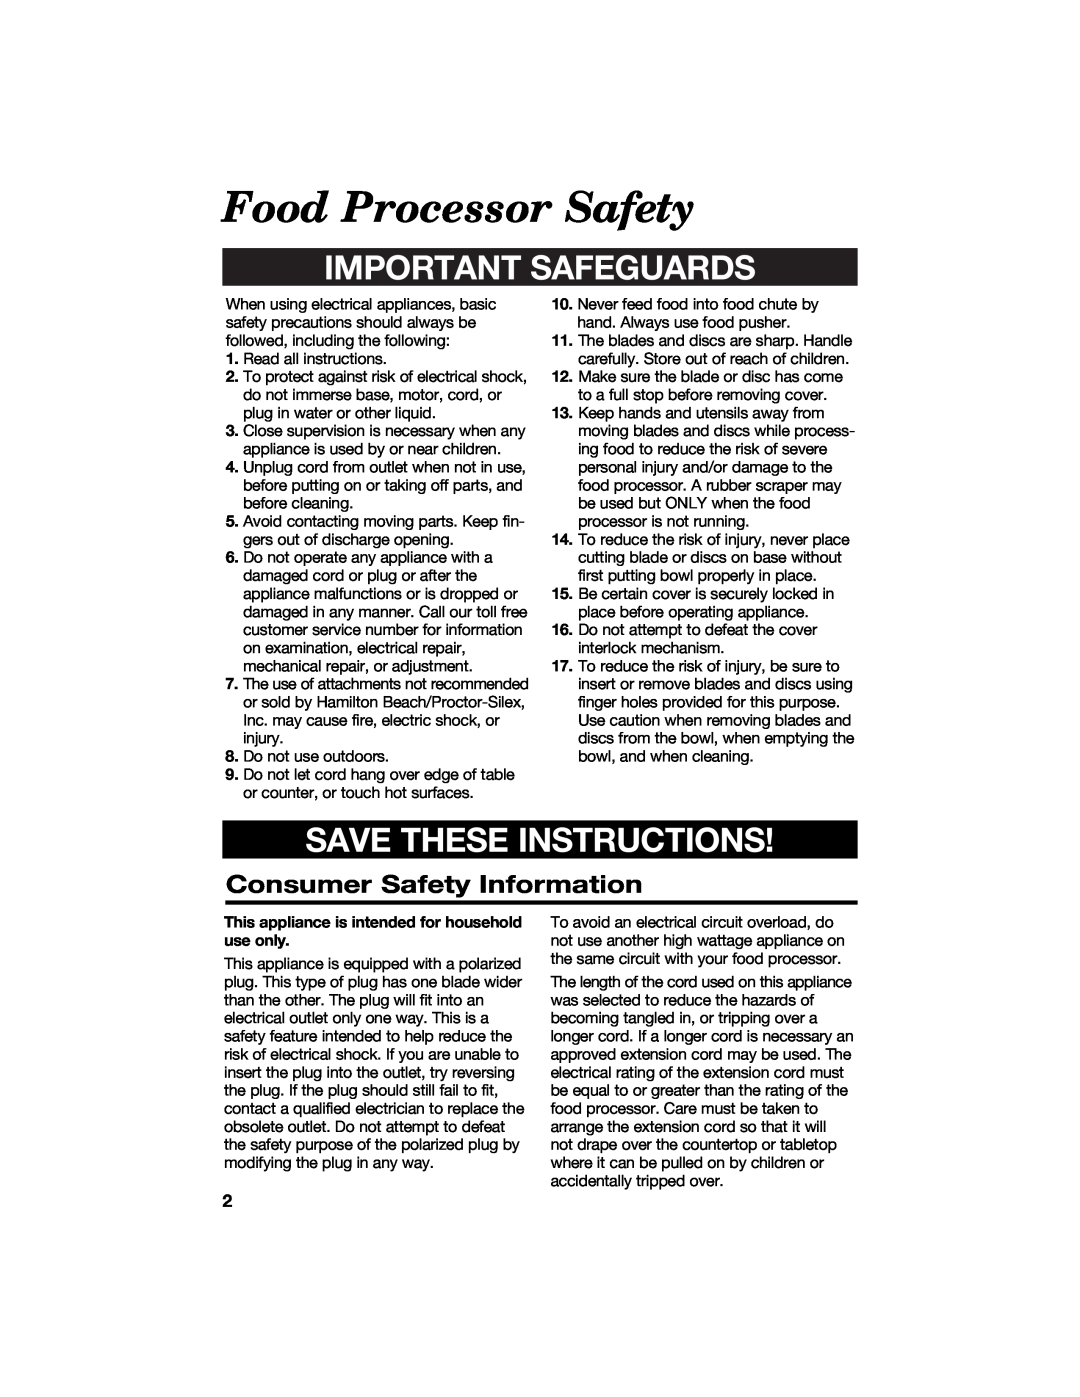 Hamilton Beach 840066200 Food Processor Safety, Consumer Safety Information, Important Safeguards, Save These Instructions 